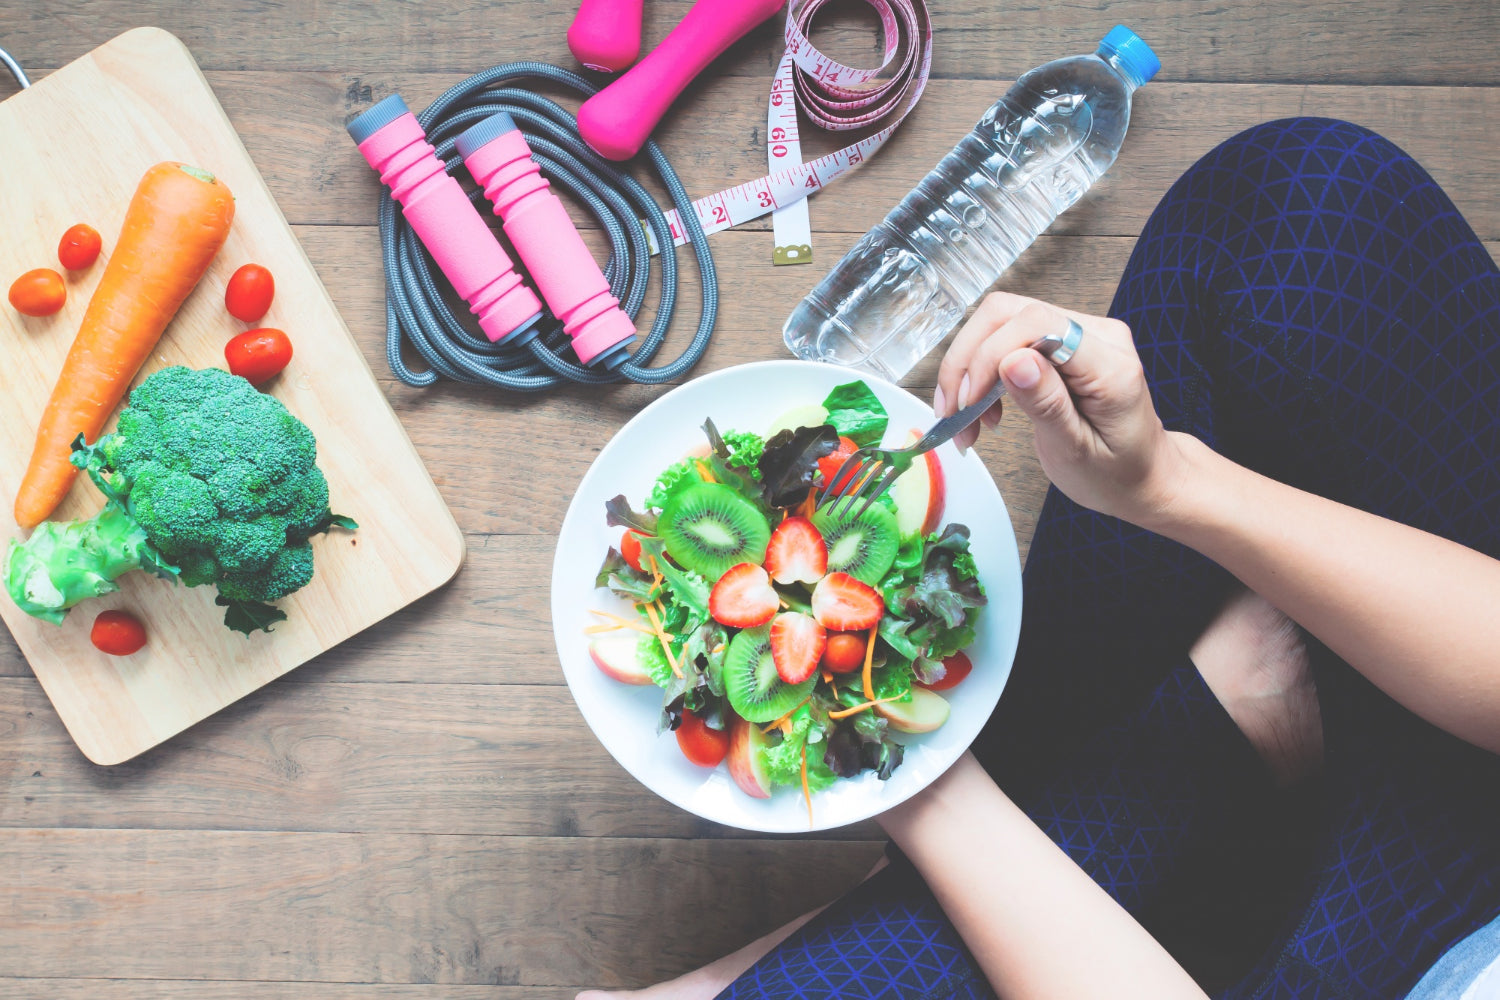 Top view of someone sitting cross legged and holding bowl of salad next to cutting board with vegetables, jump rope, measuring tape and bottle of water.